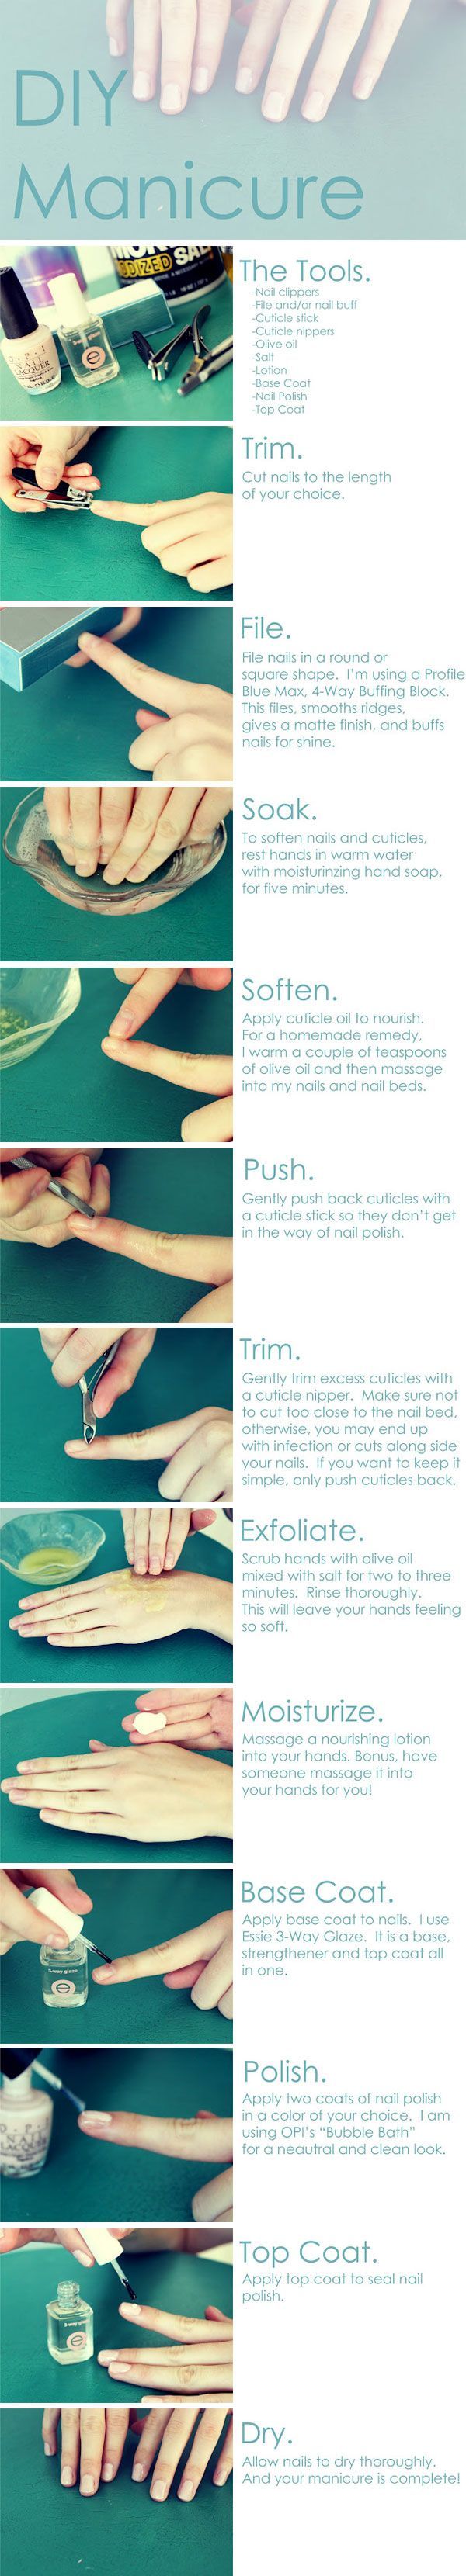 DIY Manicure Ive been looking for a DIY cuticle oil for forever!